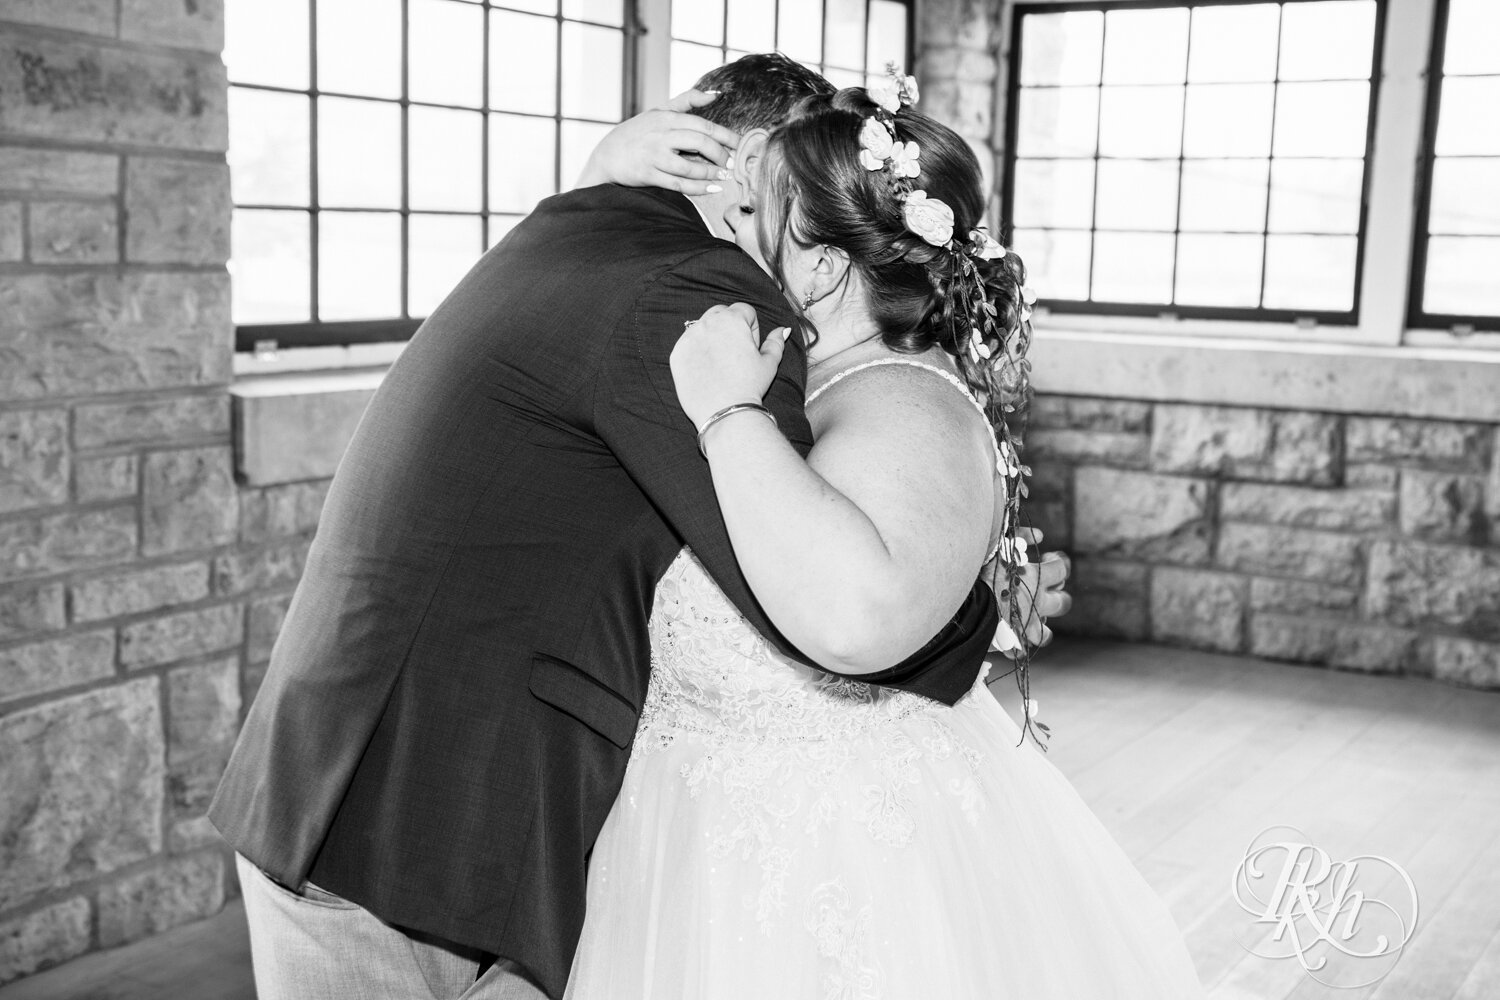 Plus size bride and groom share first look at wedding at Olmsted County Fairgrounds in Rochester, Minnesota.